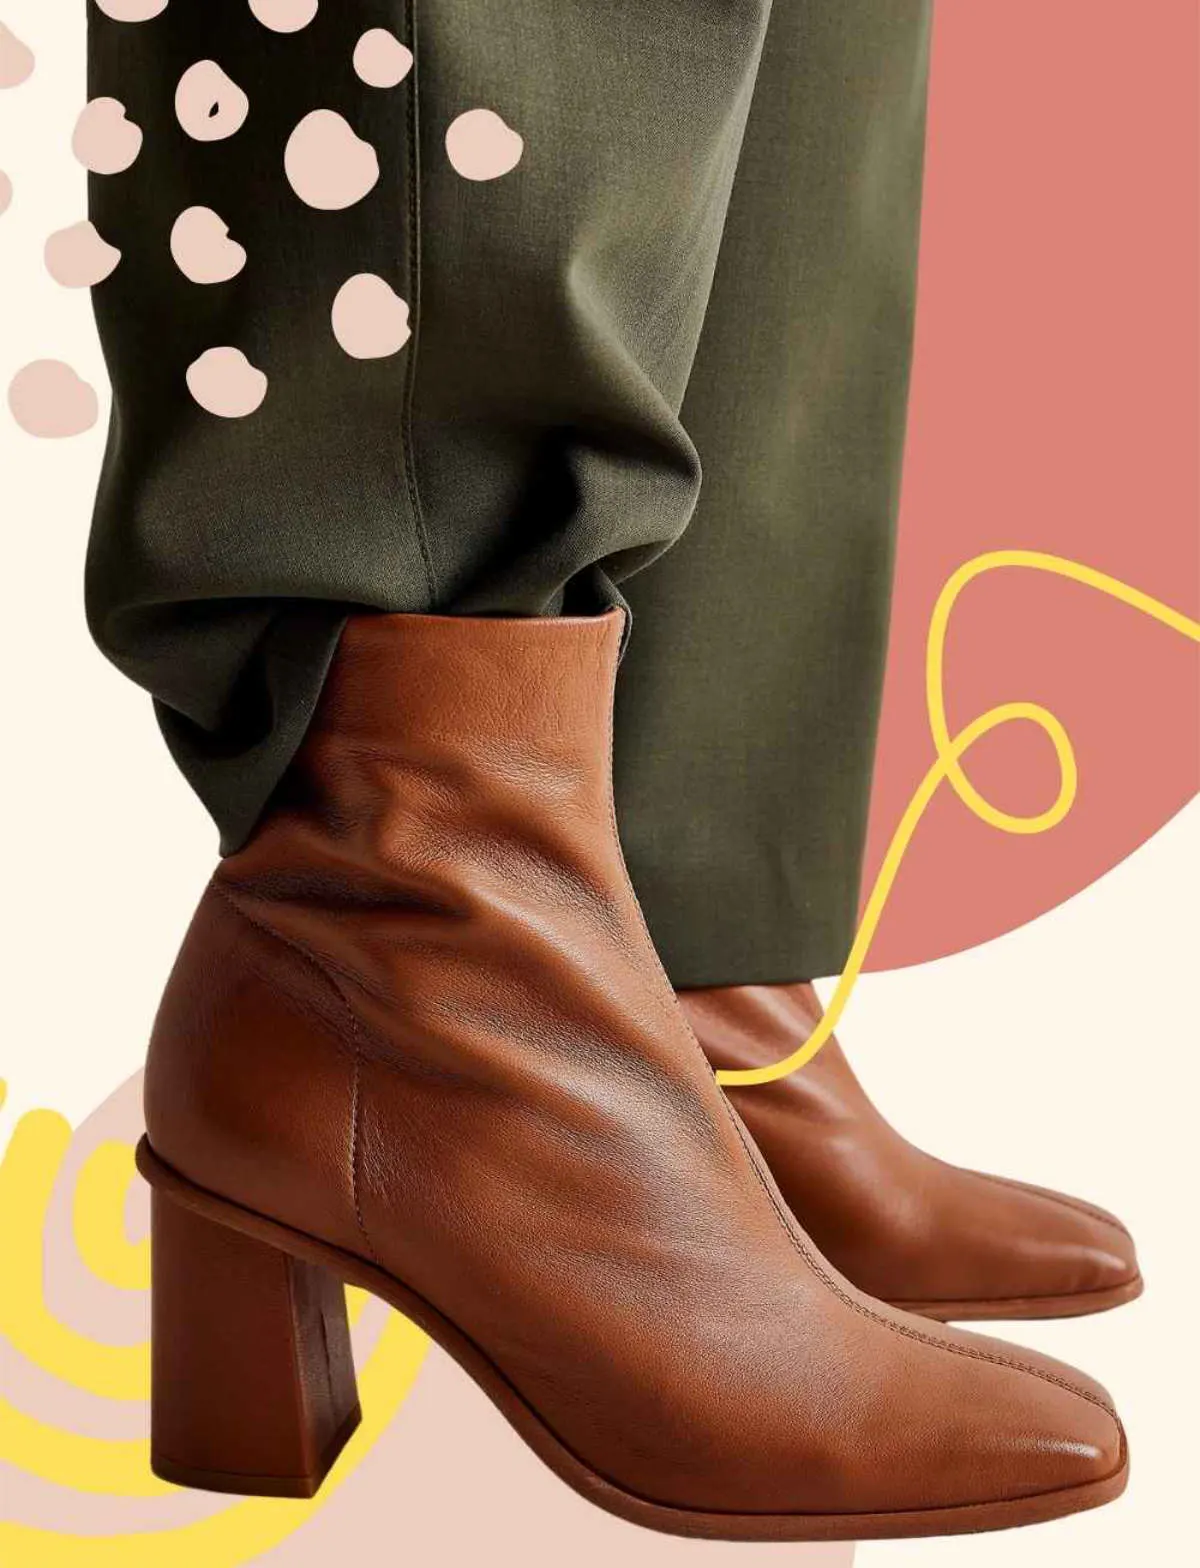 How to Wear ankle boots with dress pants womens ShoeTease.jpg